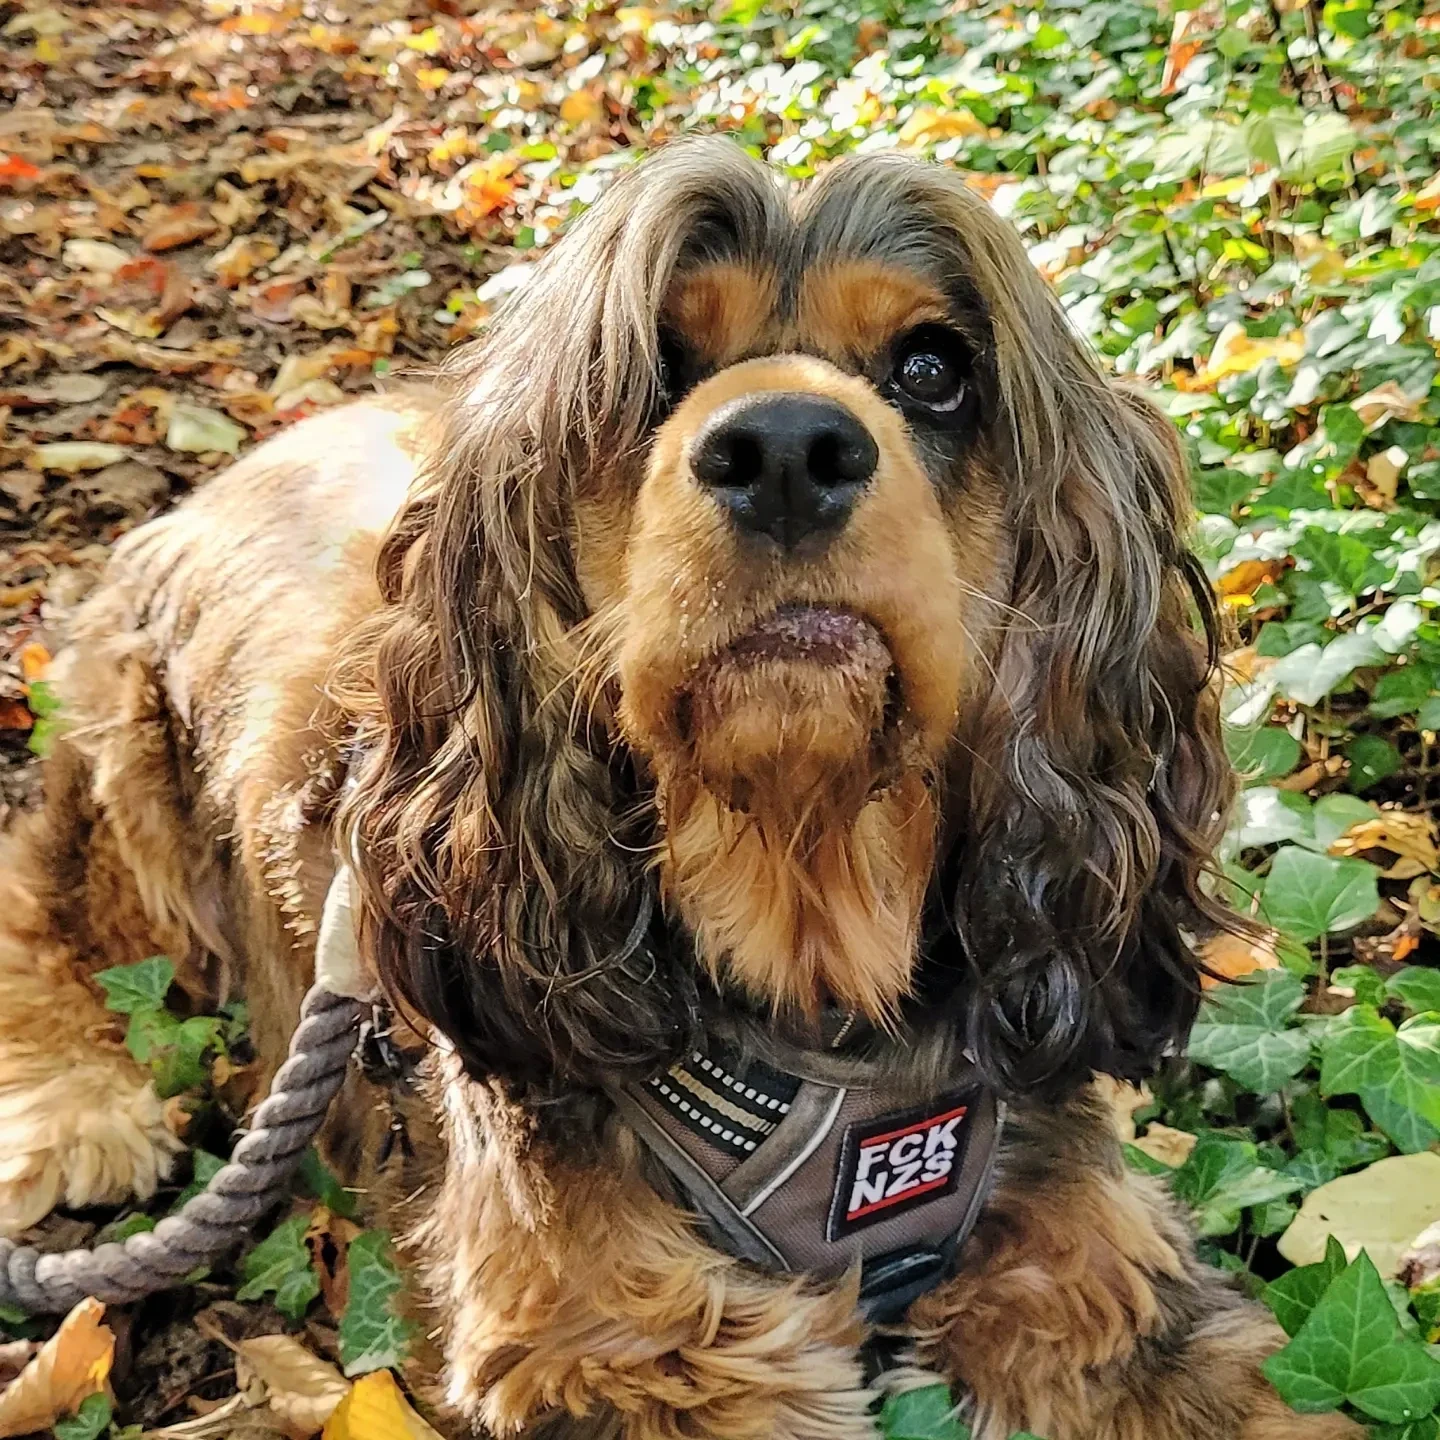 my dog: a black and tan sable cocker spaniel with a harness with a patch that says "FCK NZS" (Fuck Nazis), she is looking up with her lip stuck on one side of her mouth